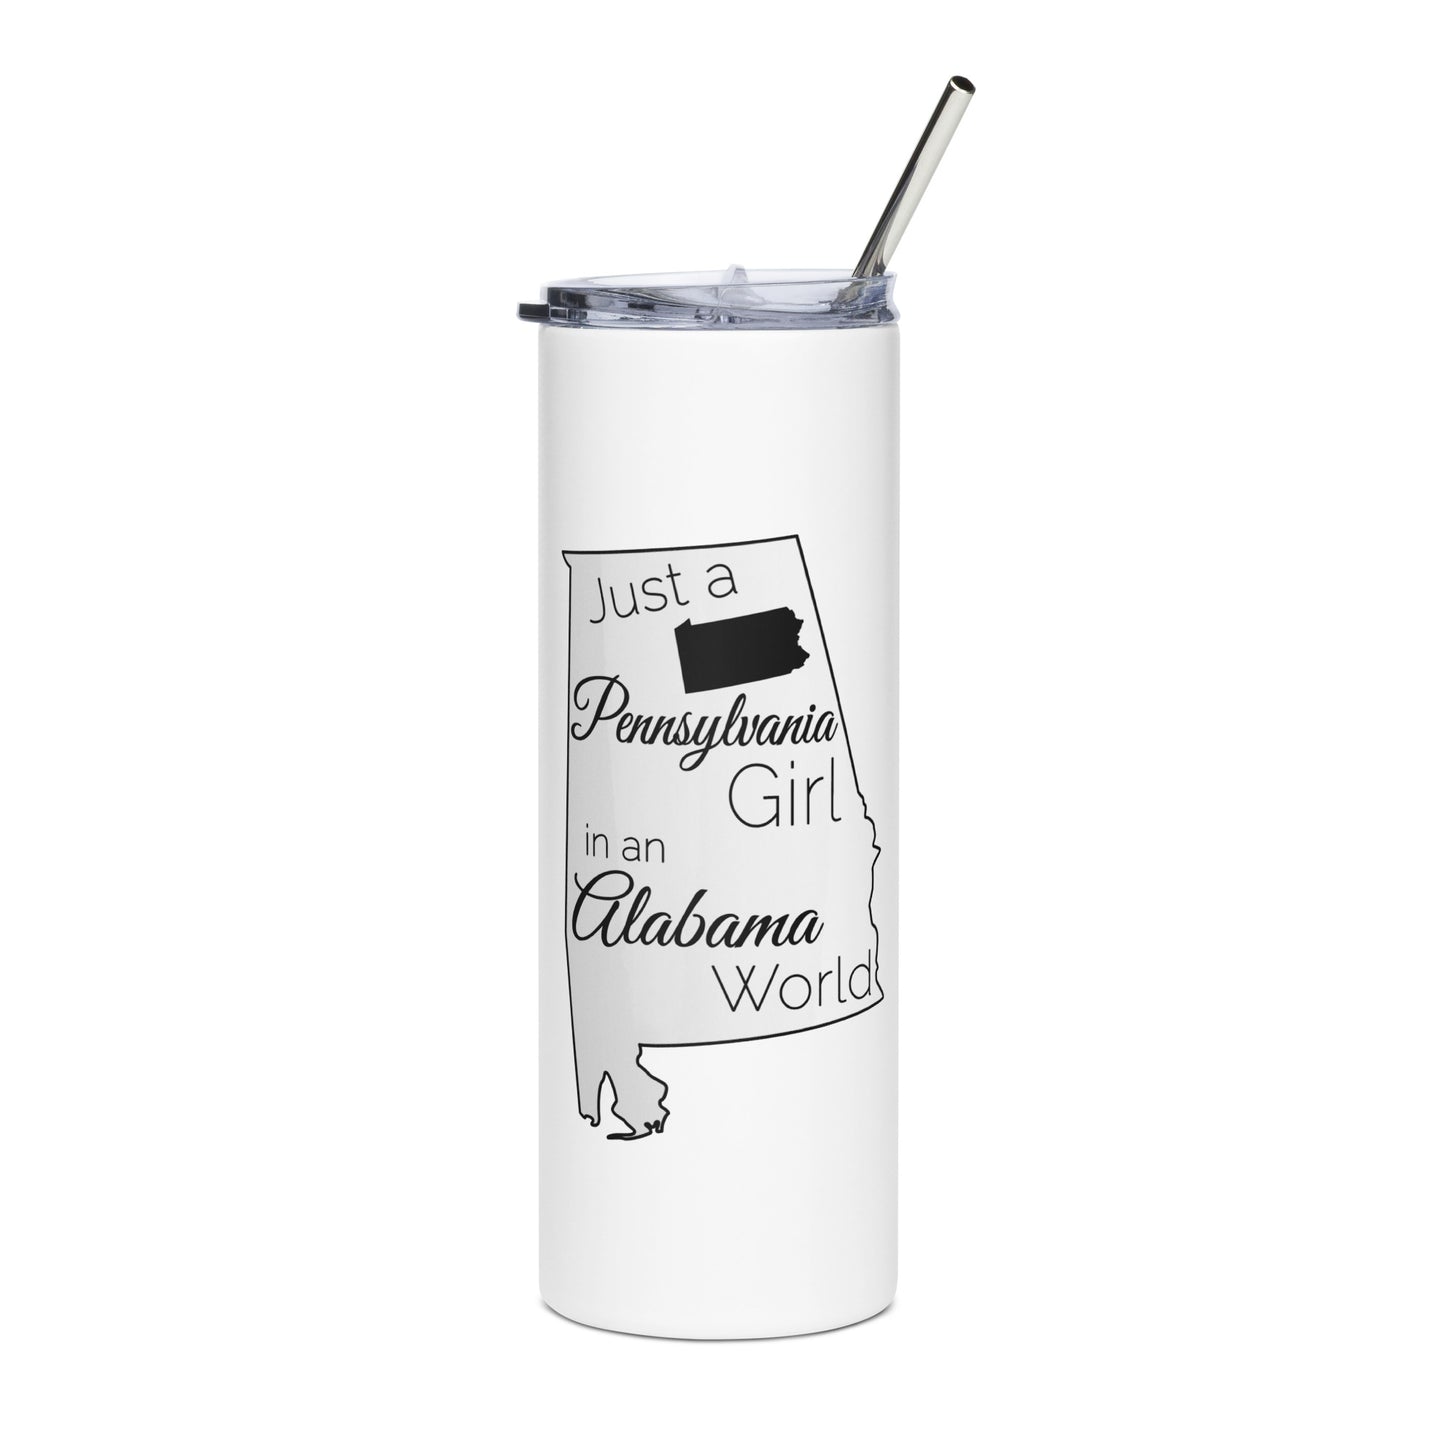 Just a Pennsylvania Girl in an Alabama World Stainless steel tumbler